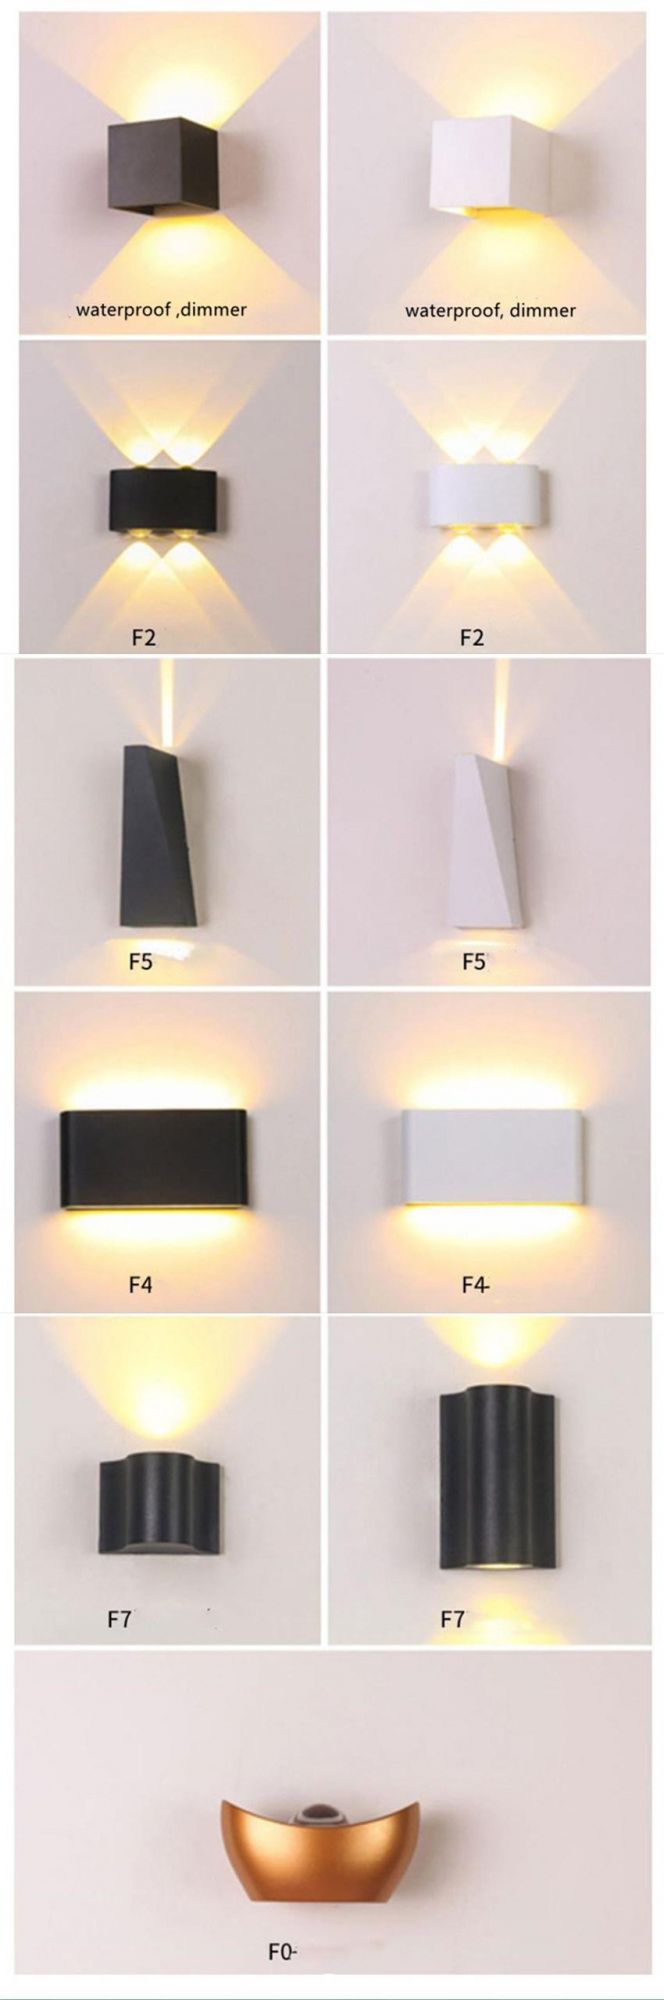 Hot Selling LED Study Wall Lamp for Bedroom Reading Room